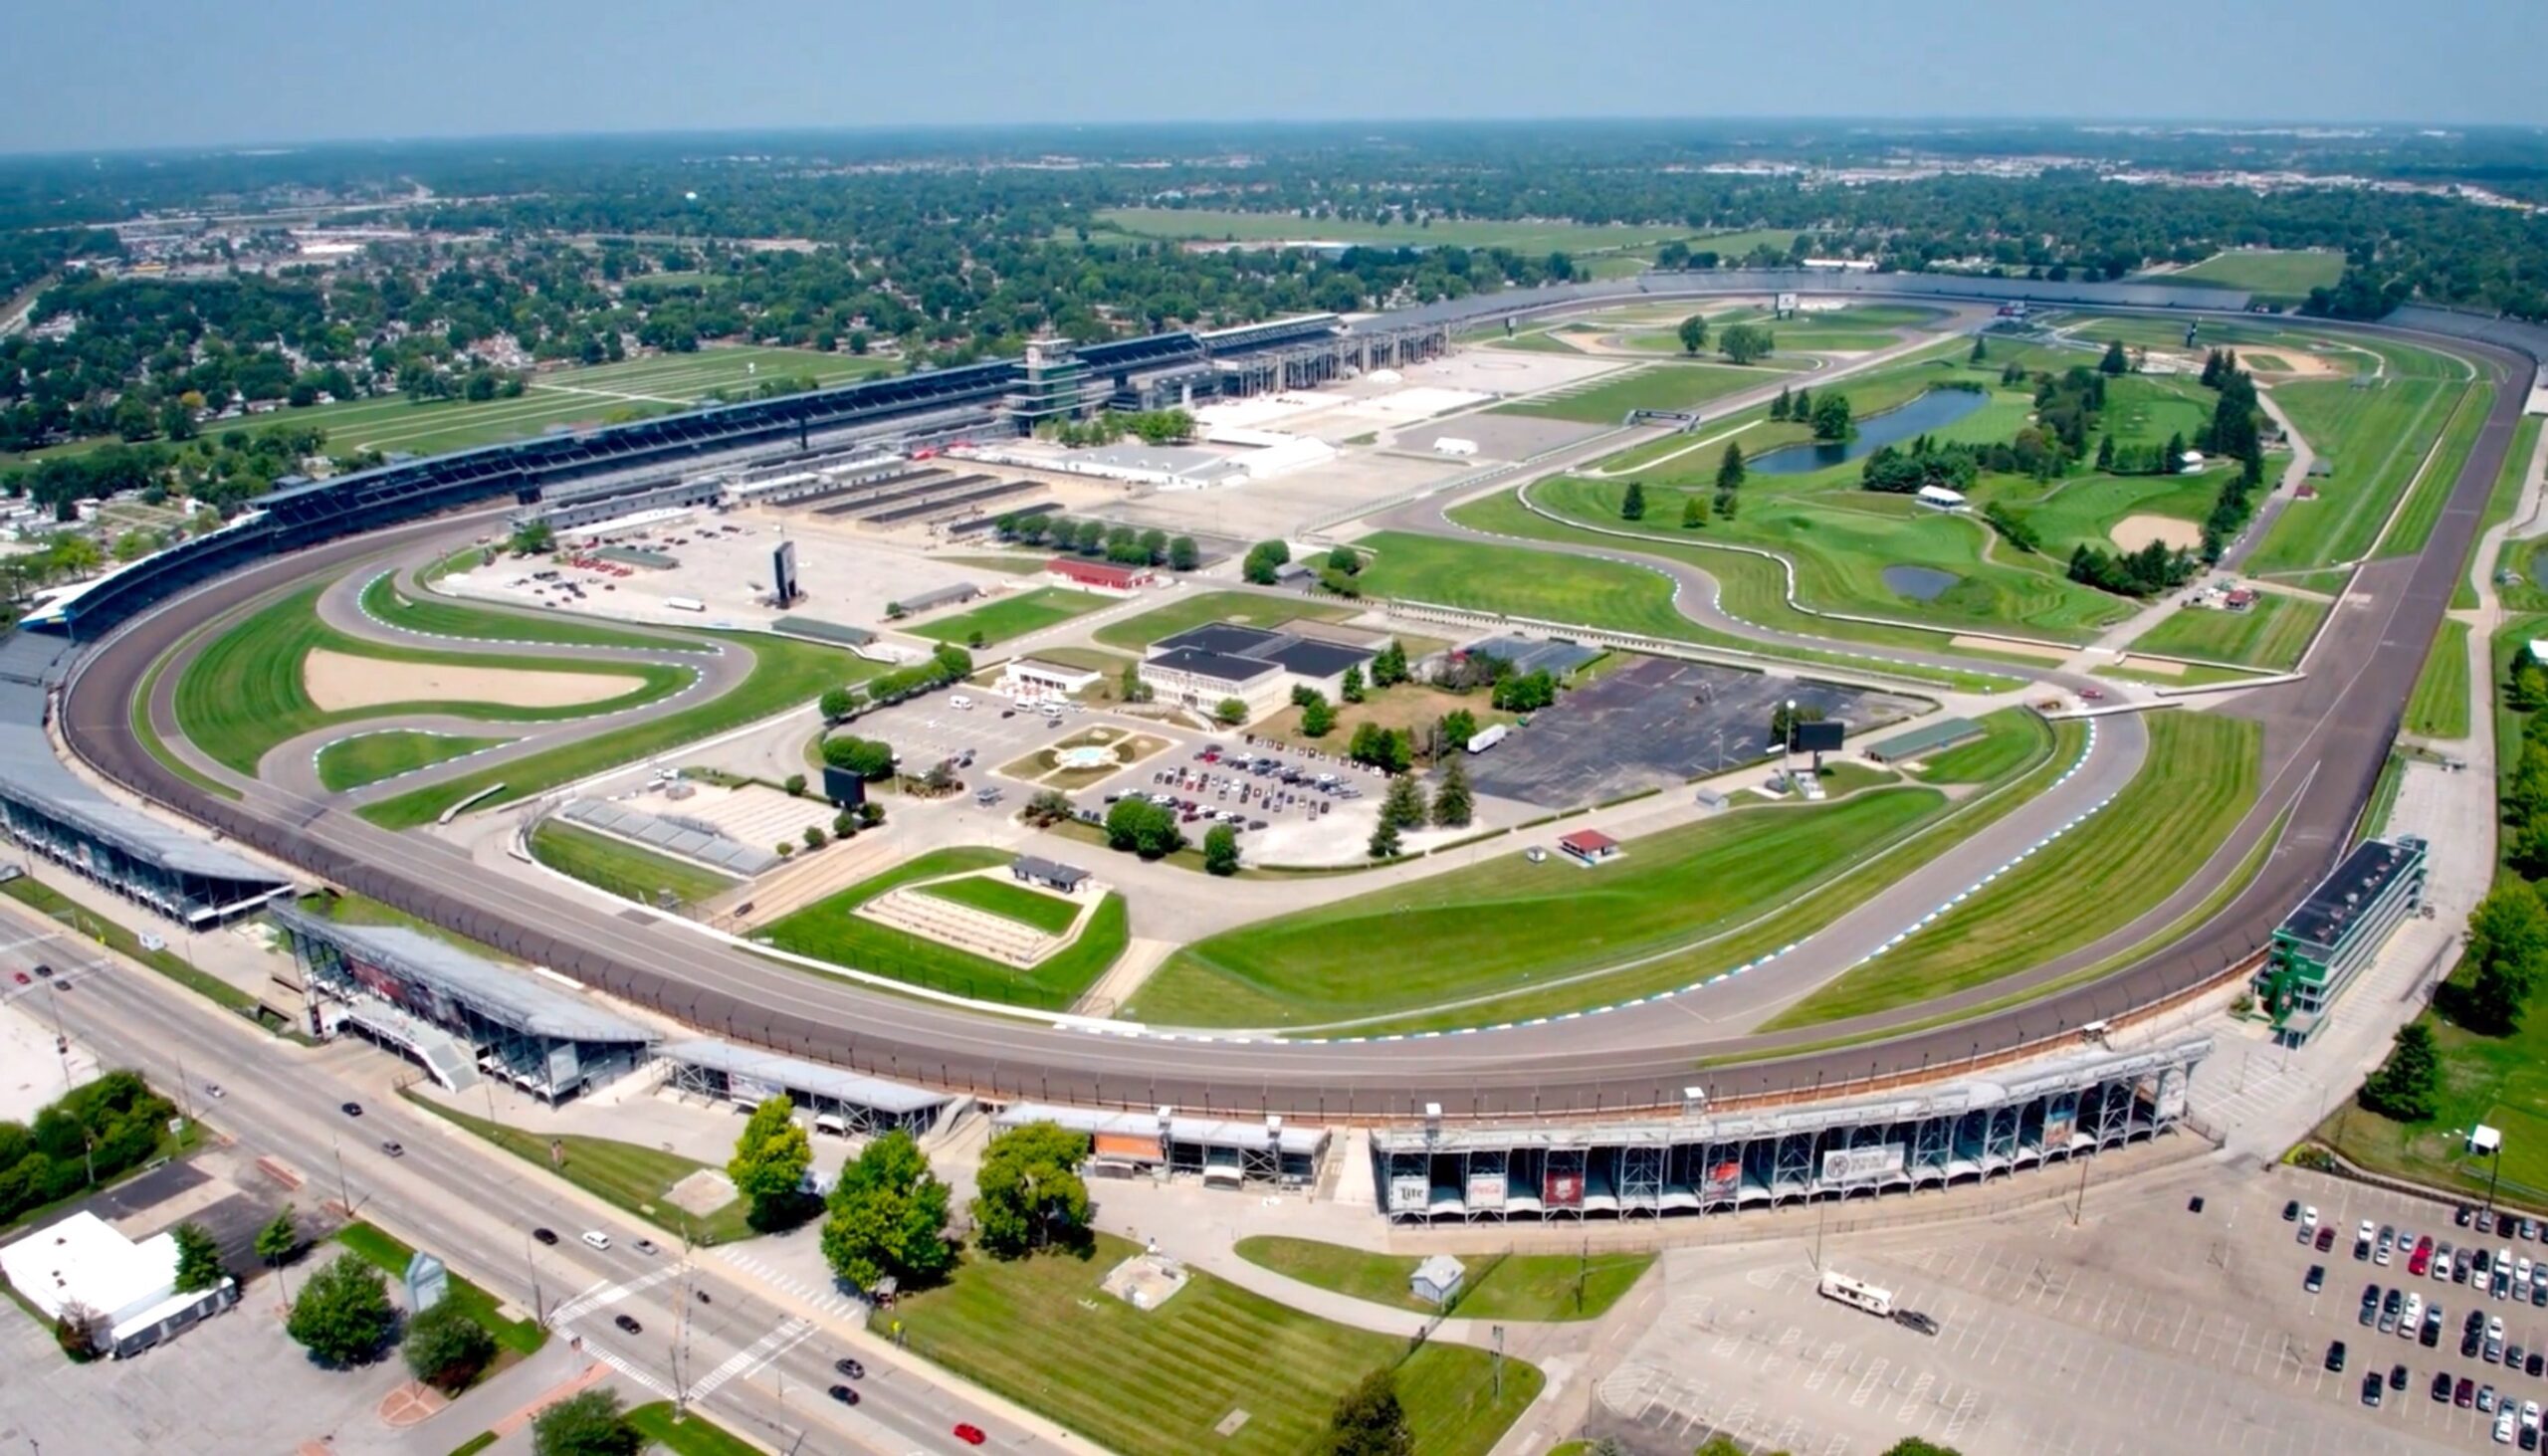 Drone shot looks over the oval track at the Indianapolis Motor Speedway